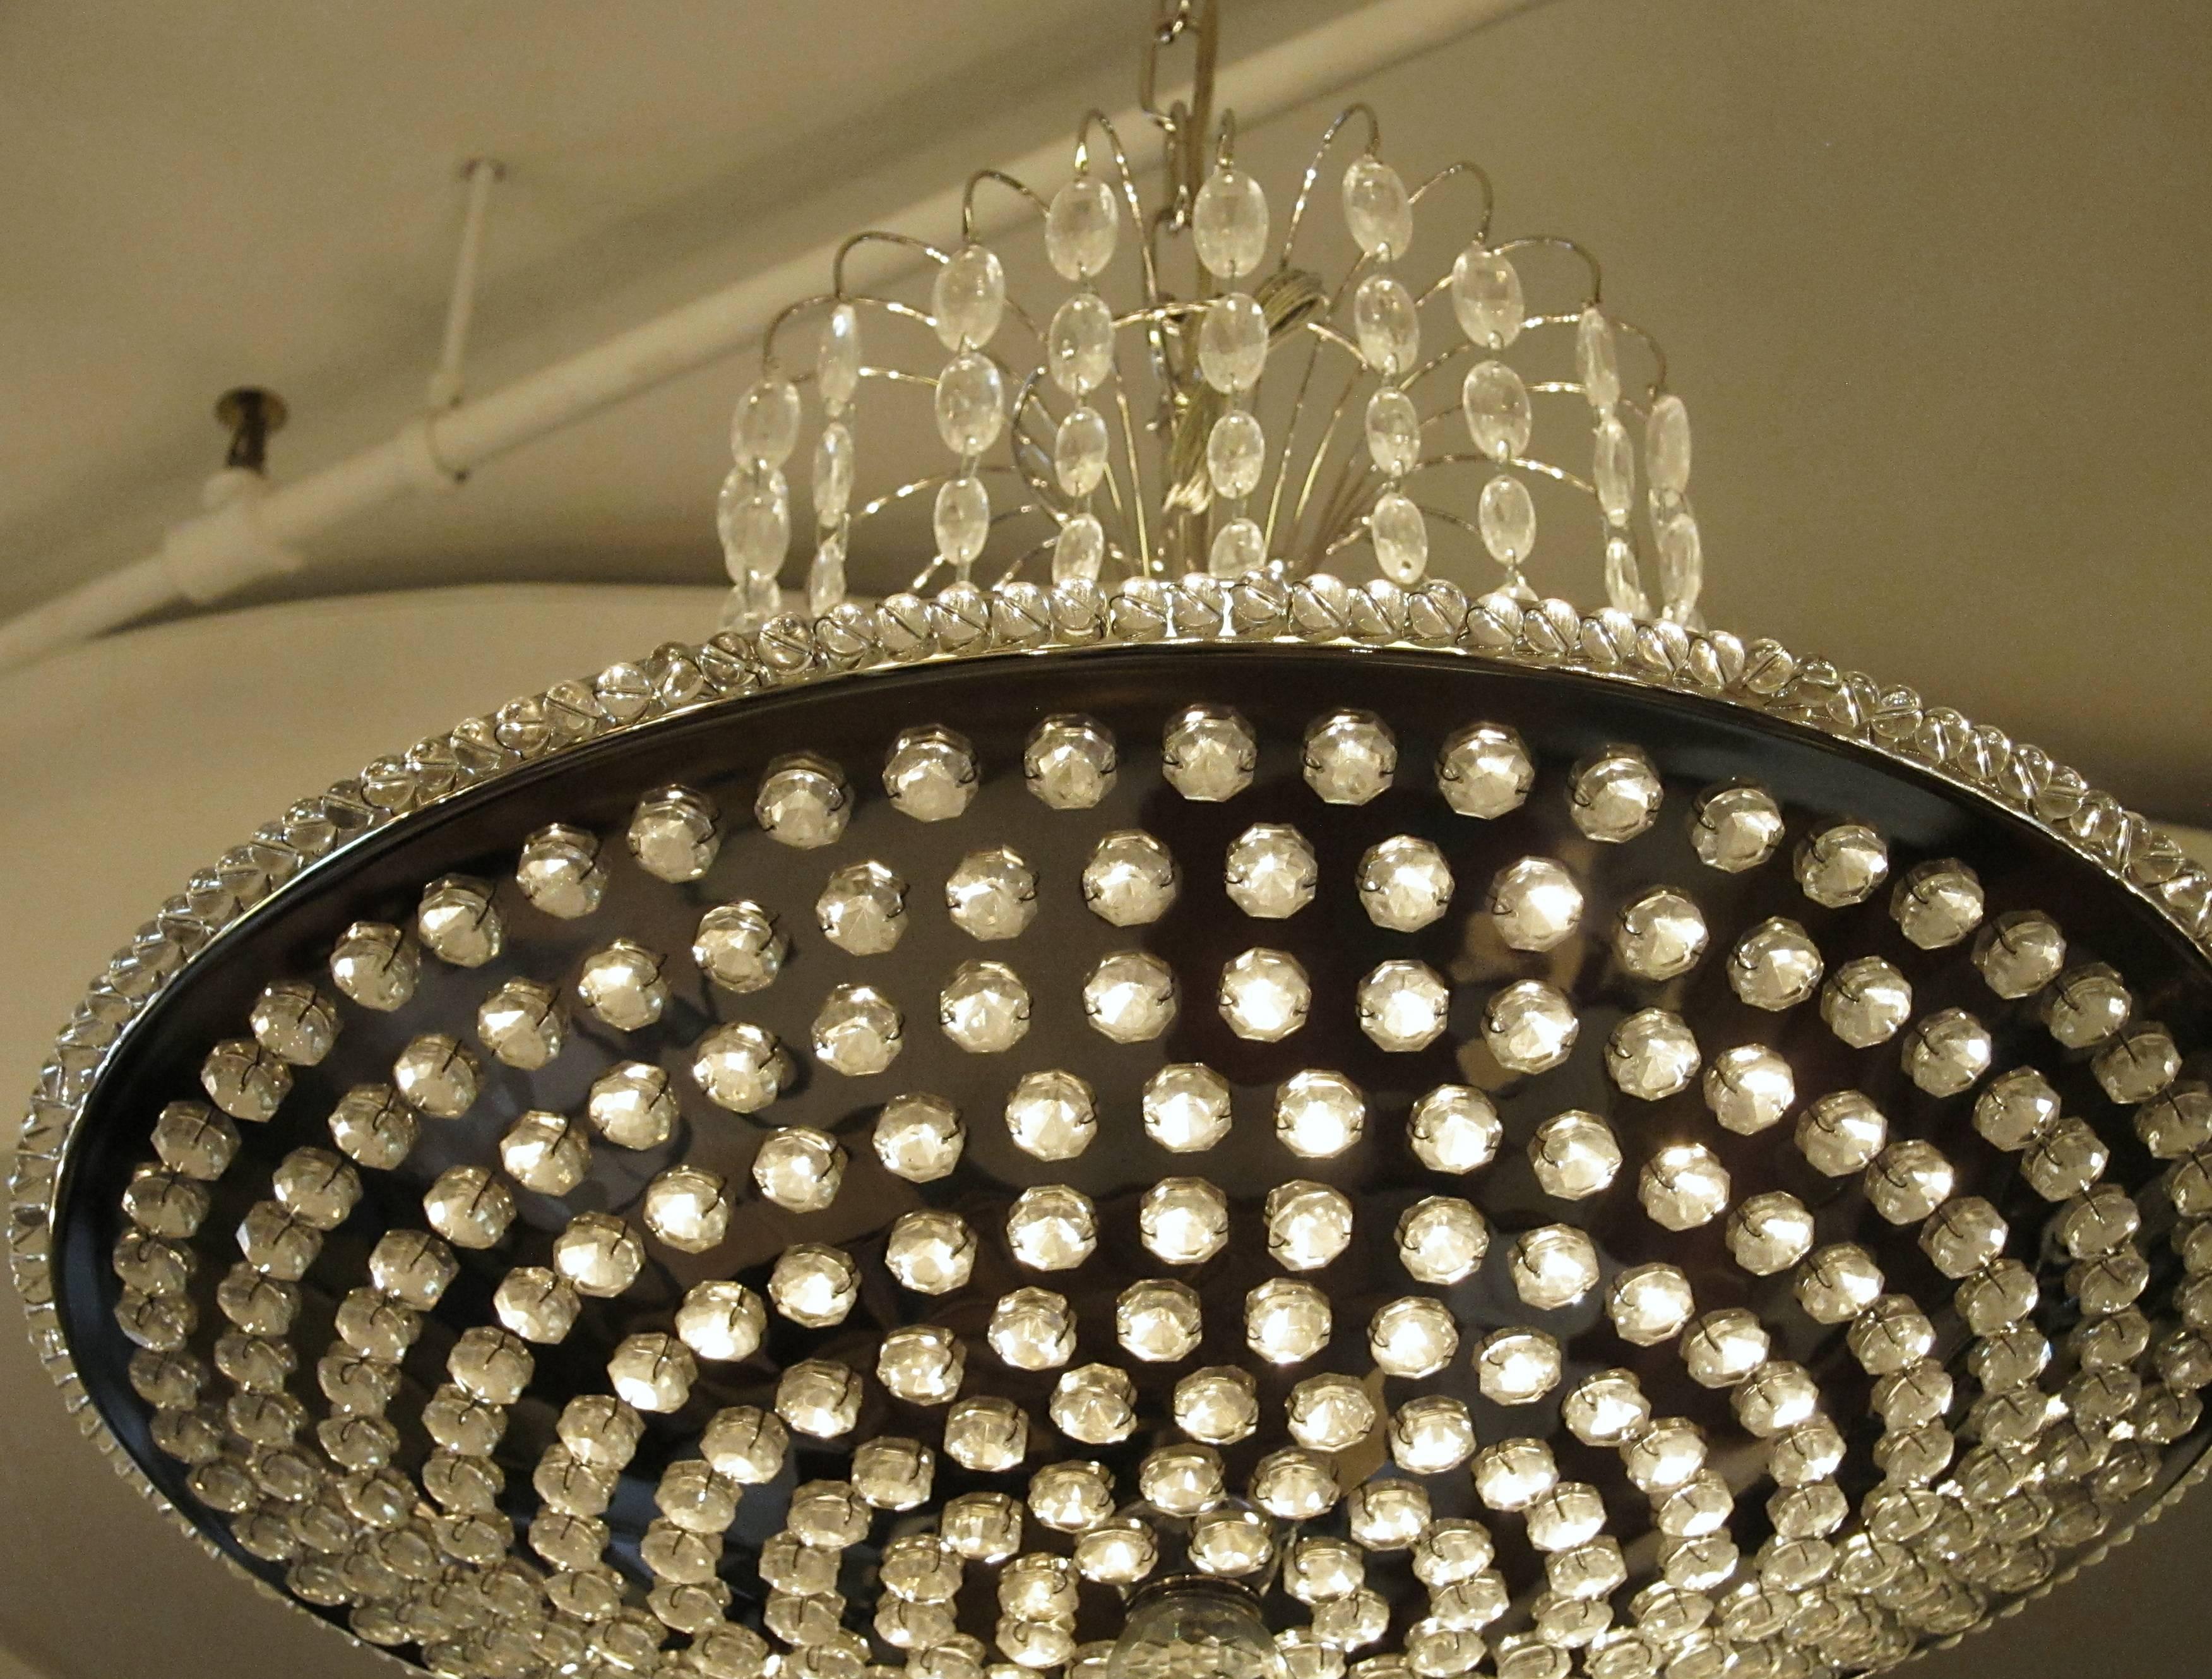 Contemporary Cascading Teardrop Crystal and Jeweled Pan Pendant Light in a Nickel Finish